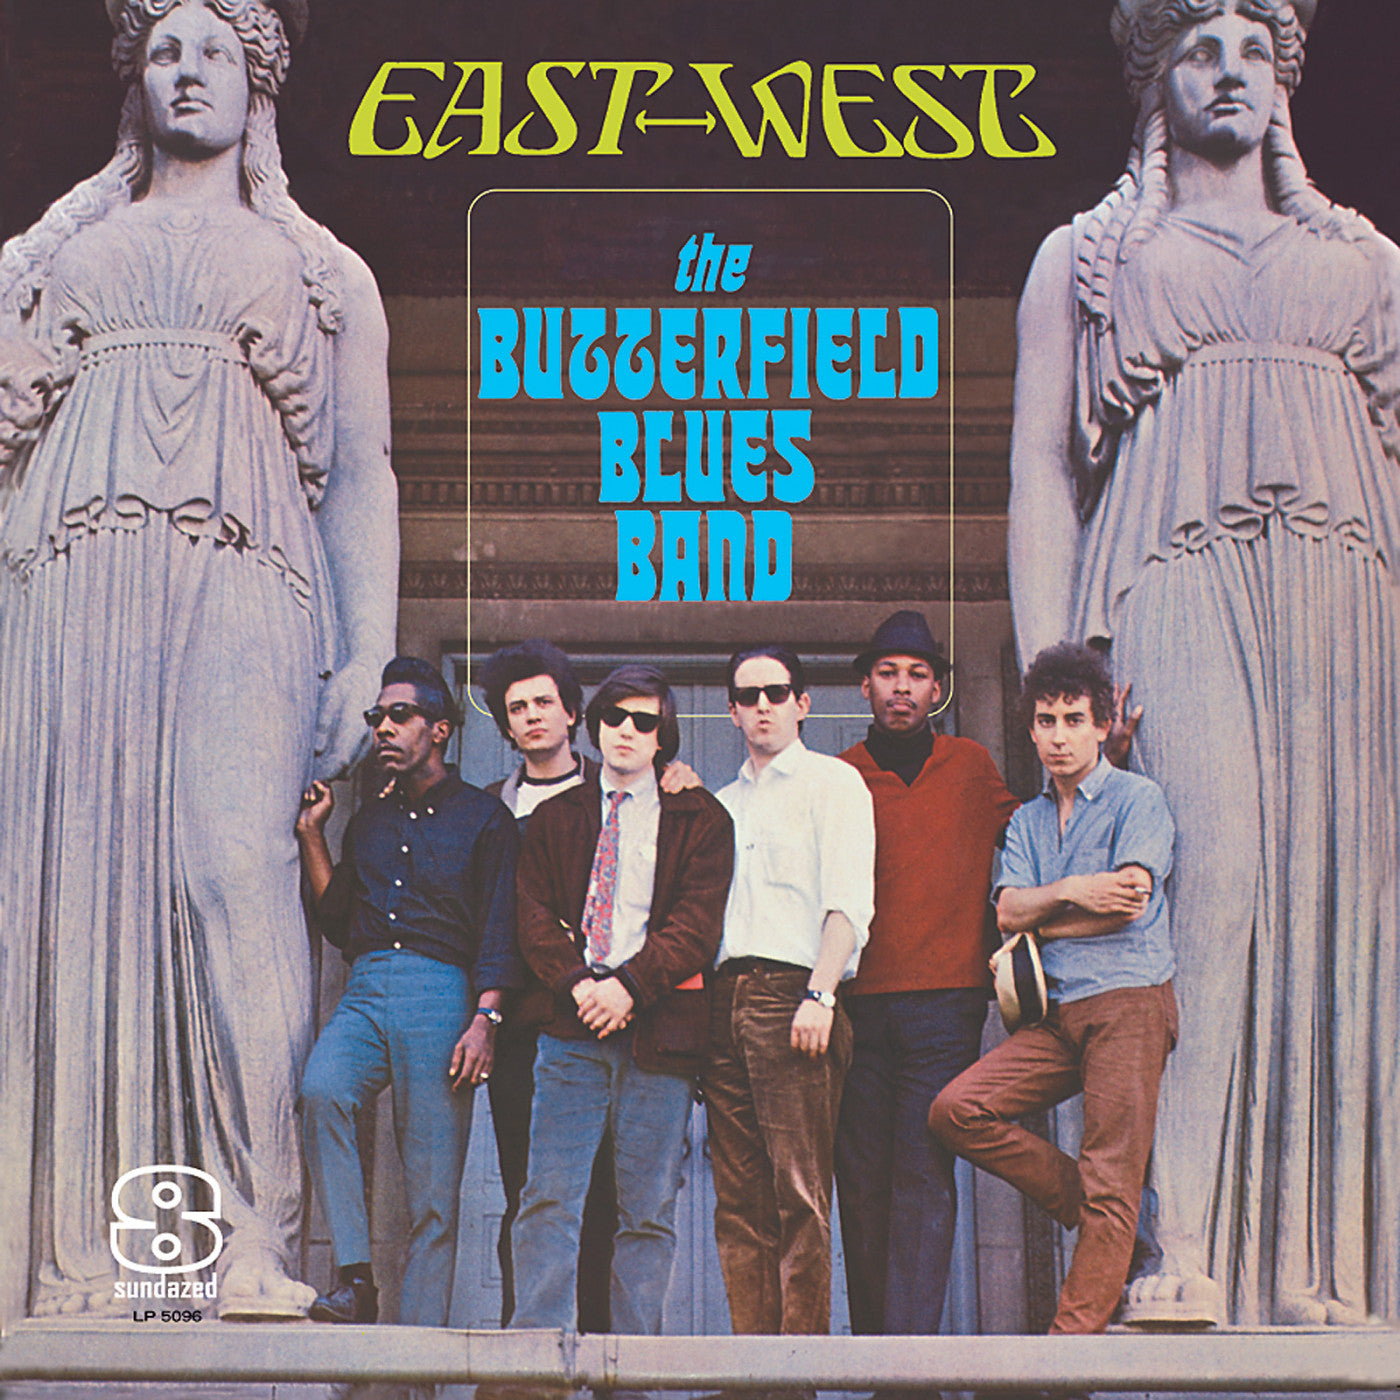 THE PAUL BUTTERFIELD BLUES BAND 'EAST-WEST' LP